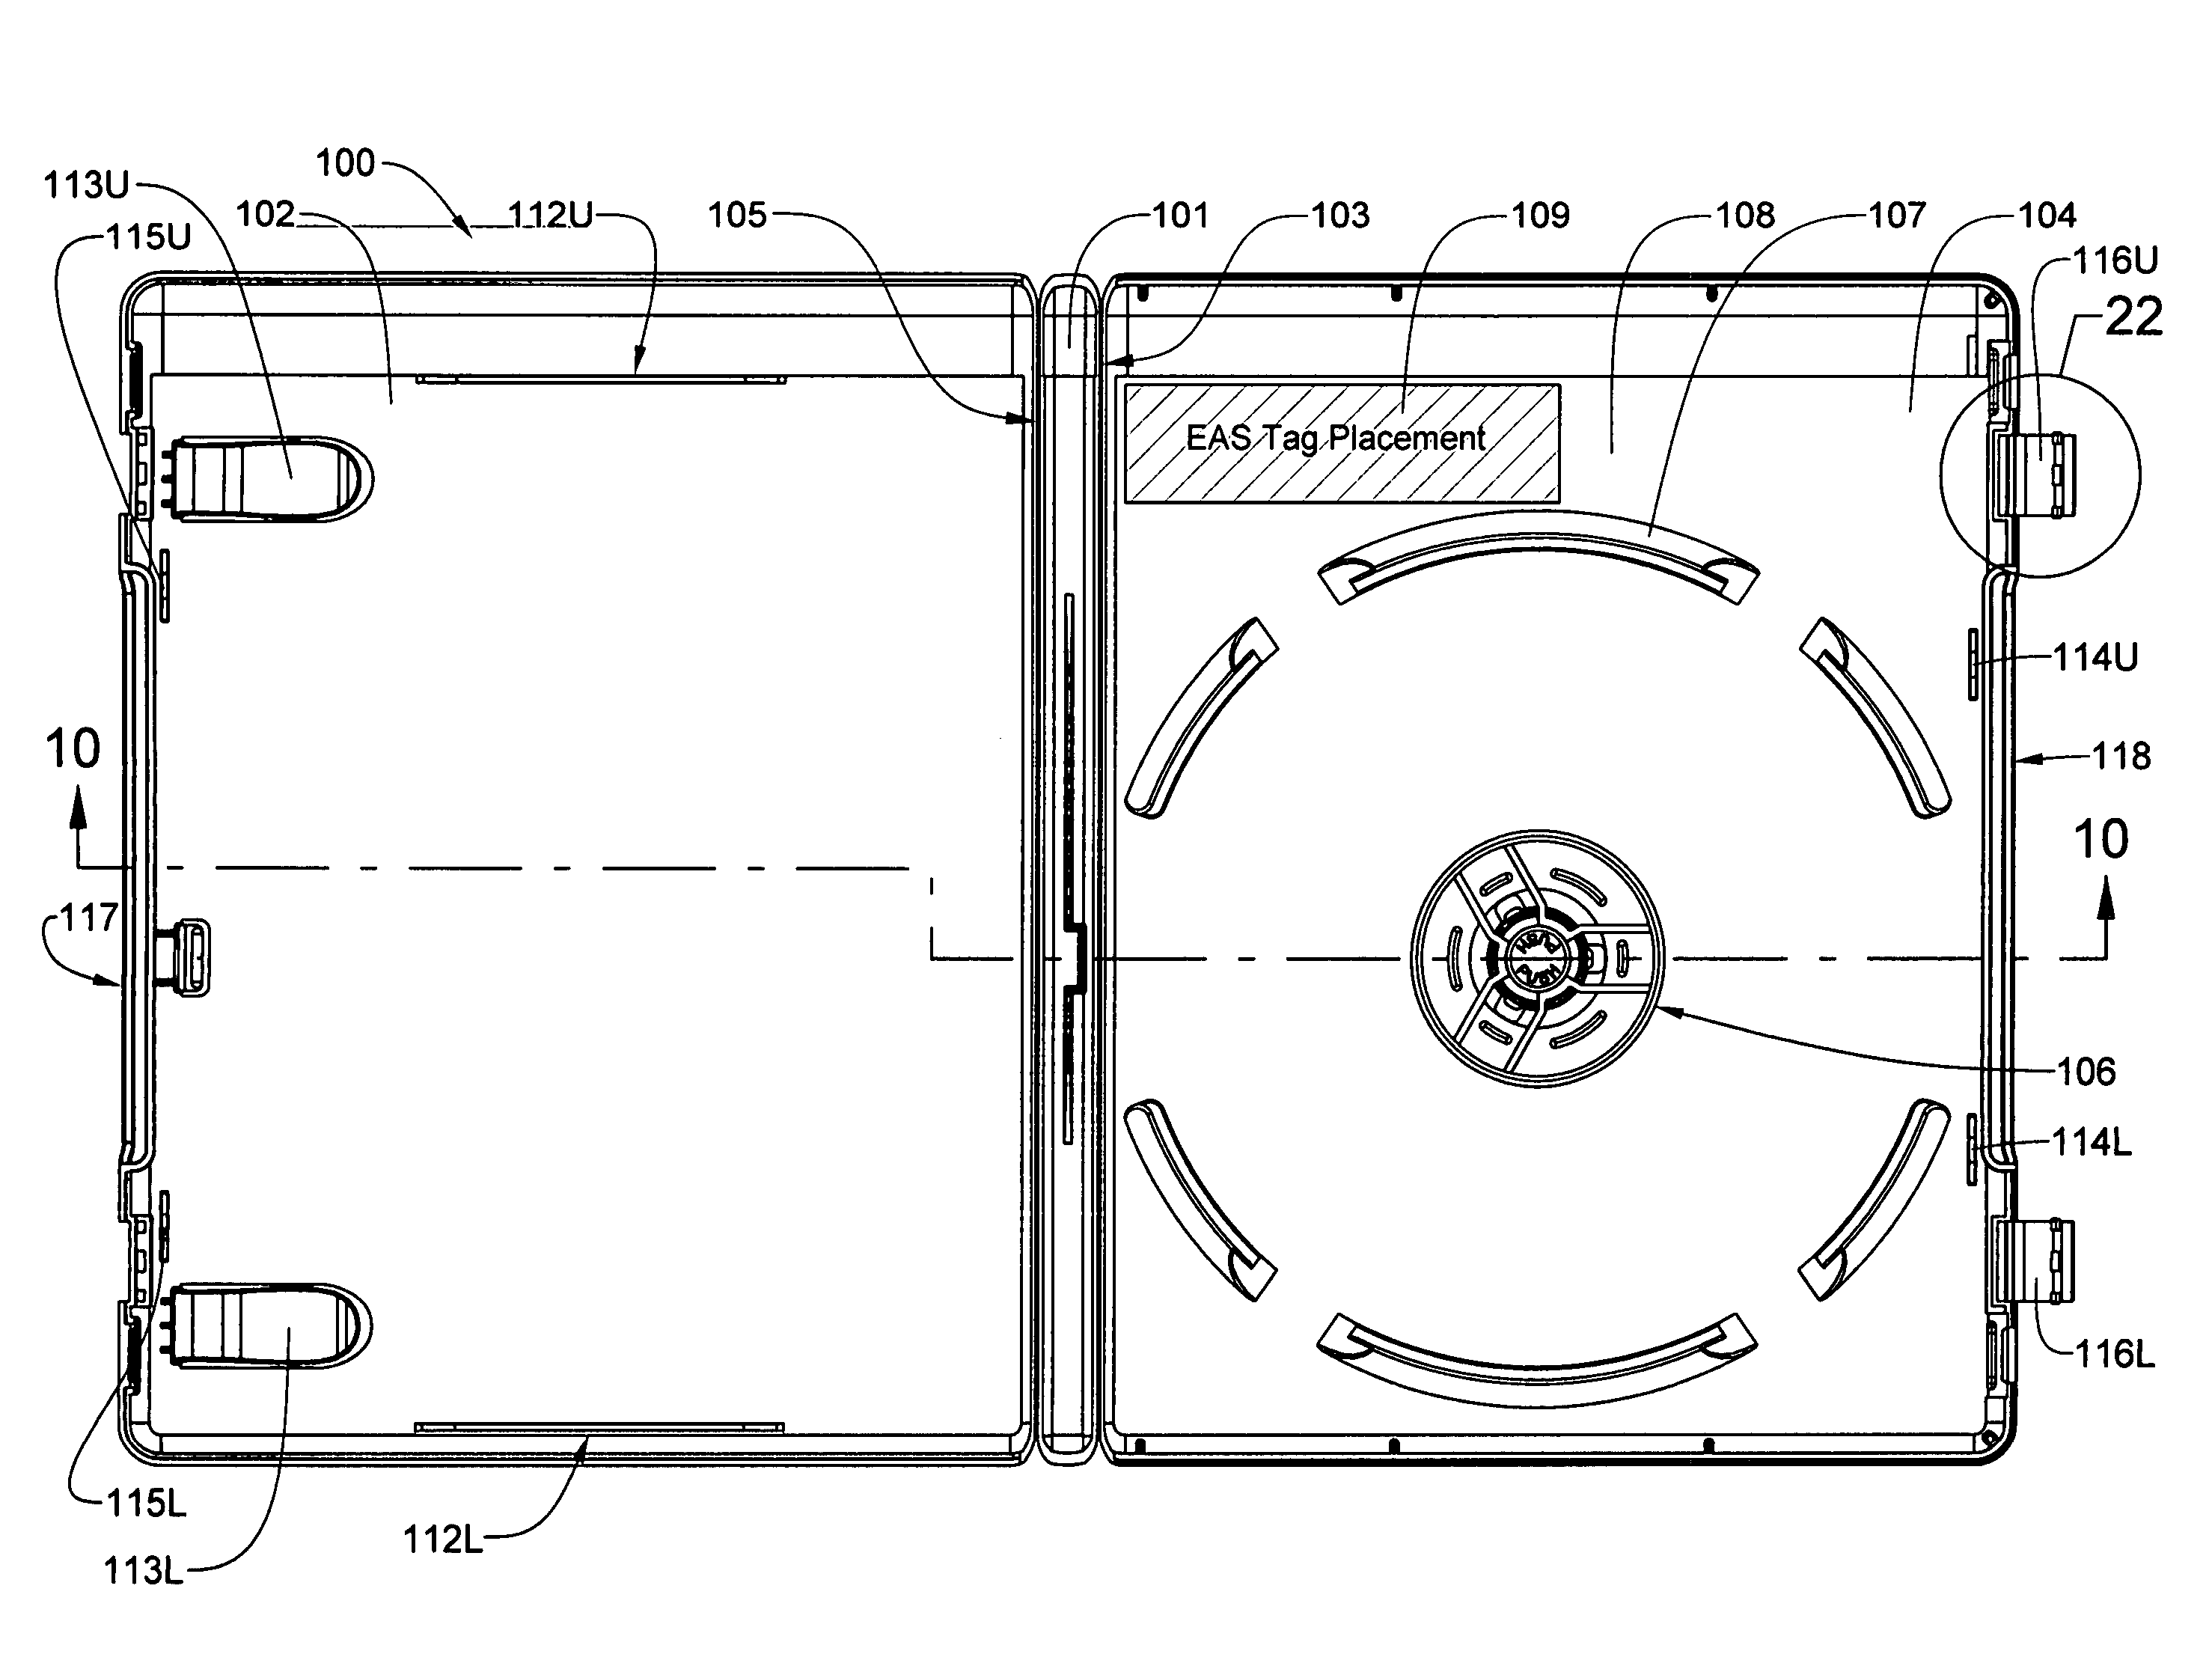 Injection molded case for optical storage discs